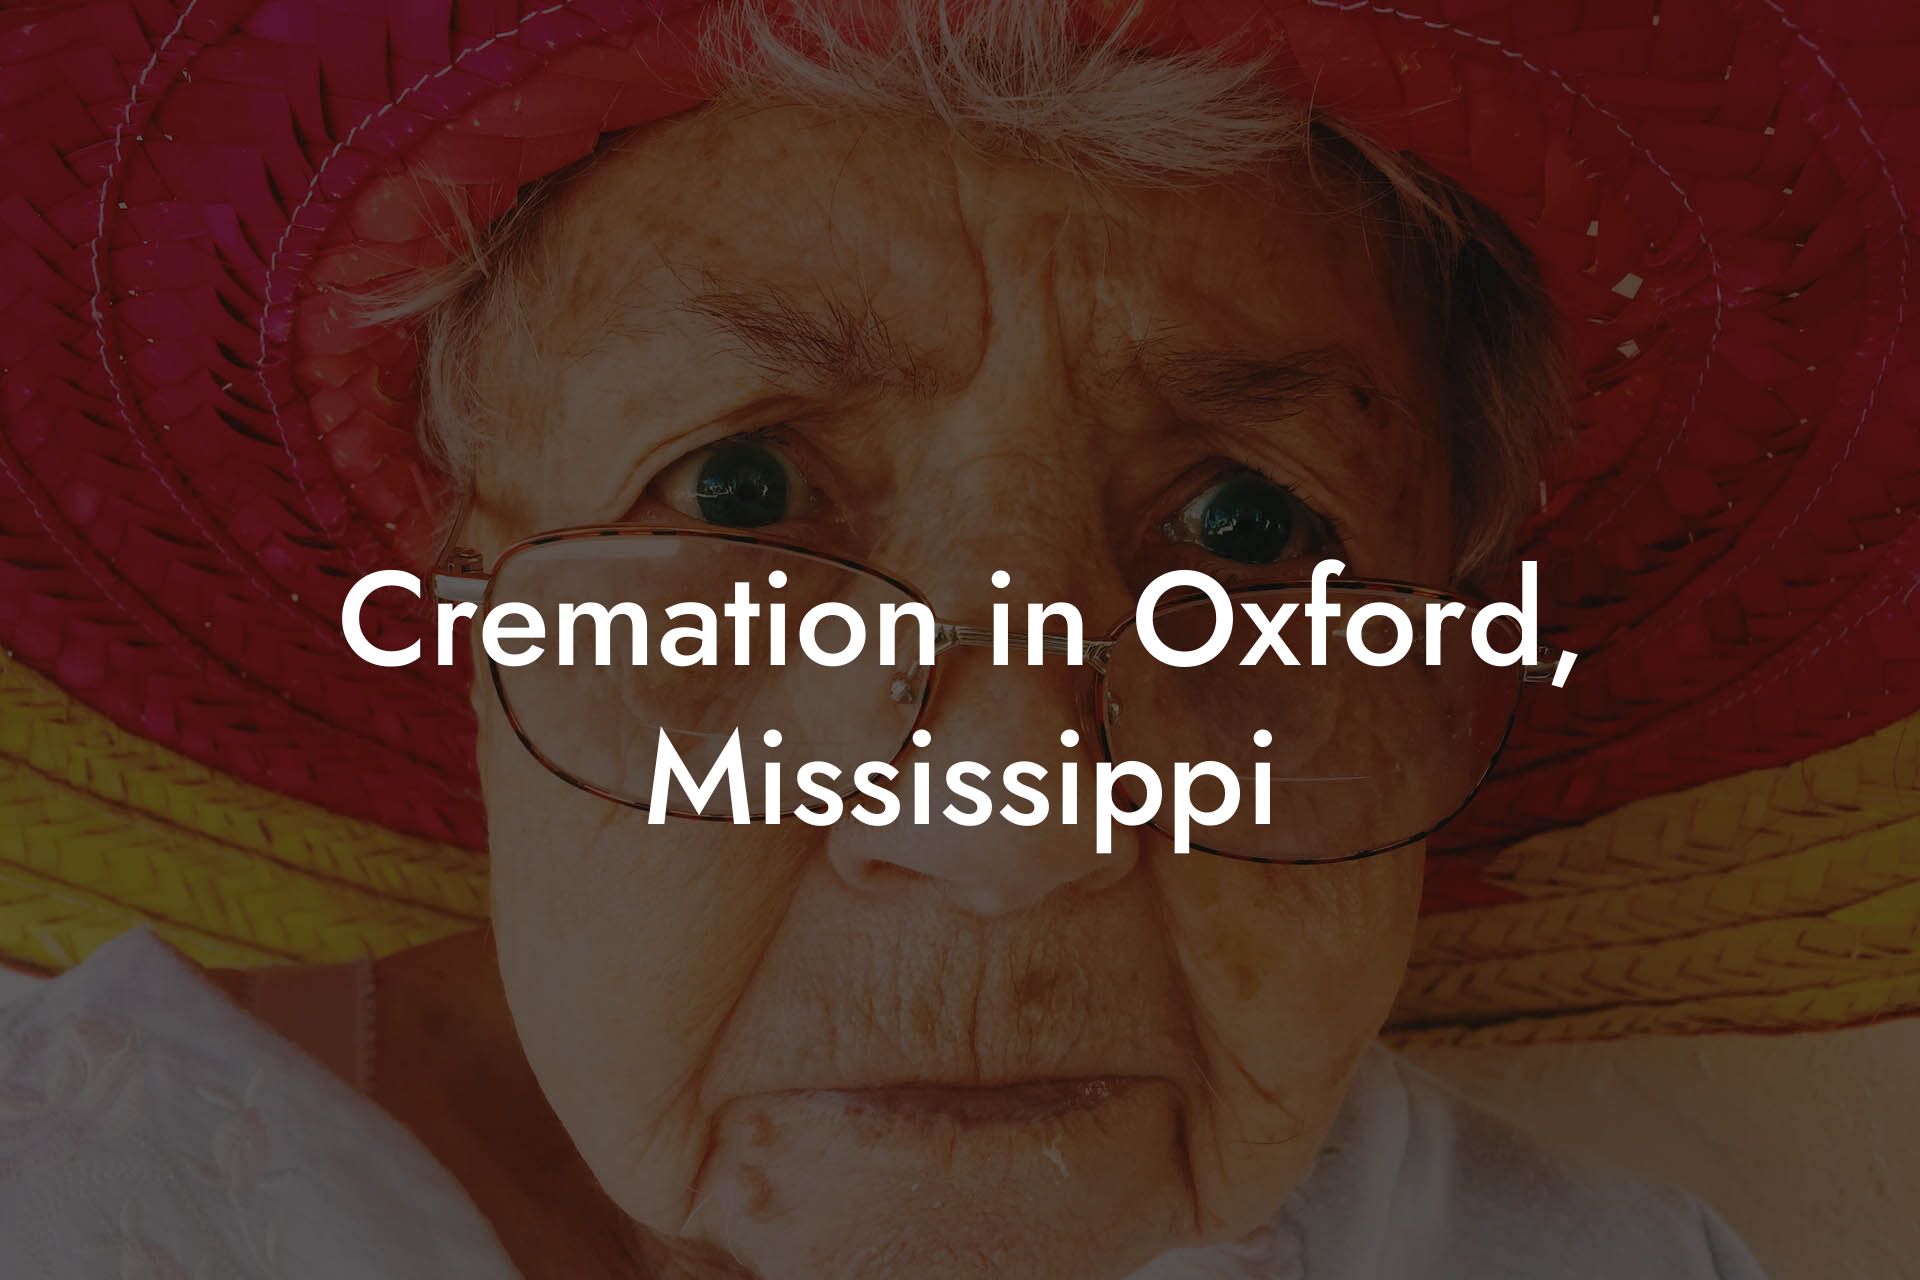 Cremation in Oxford, Mississippi